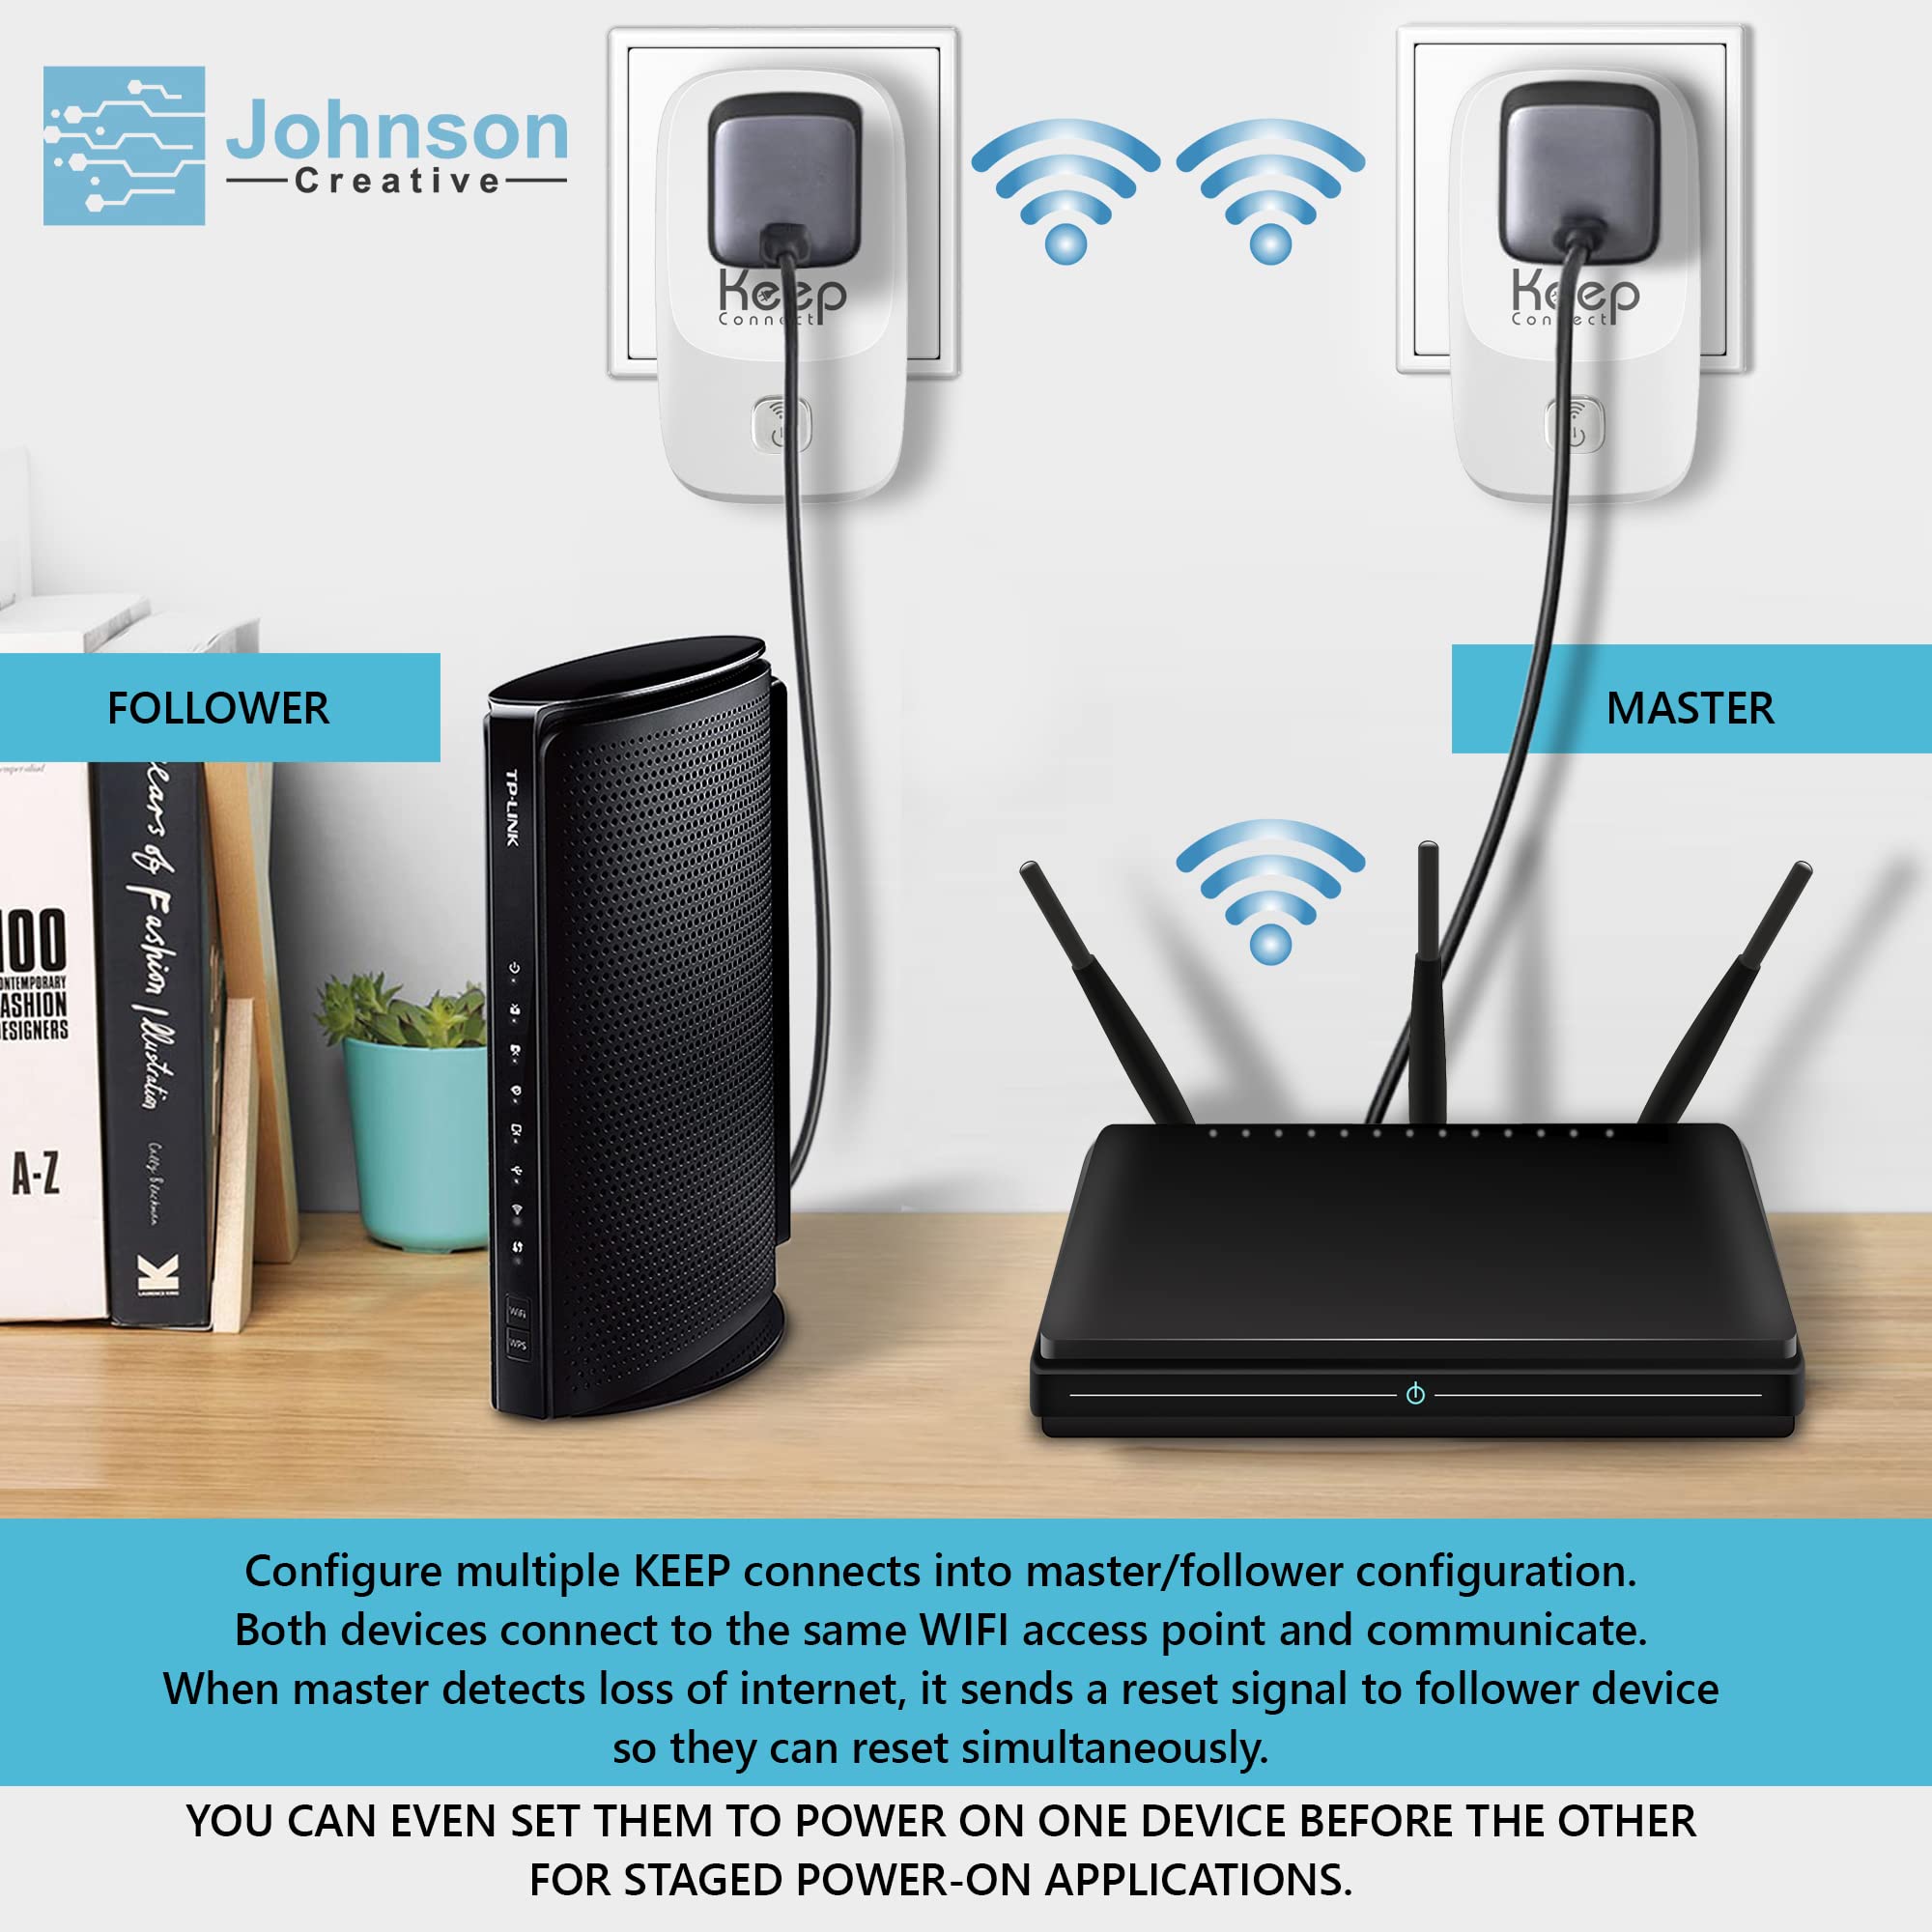 Devices connected to a router